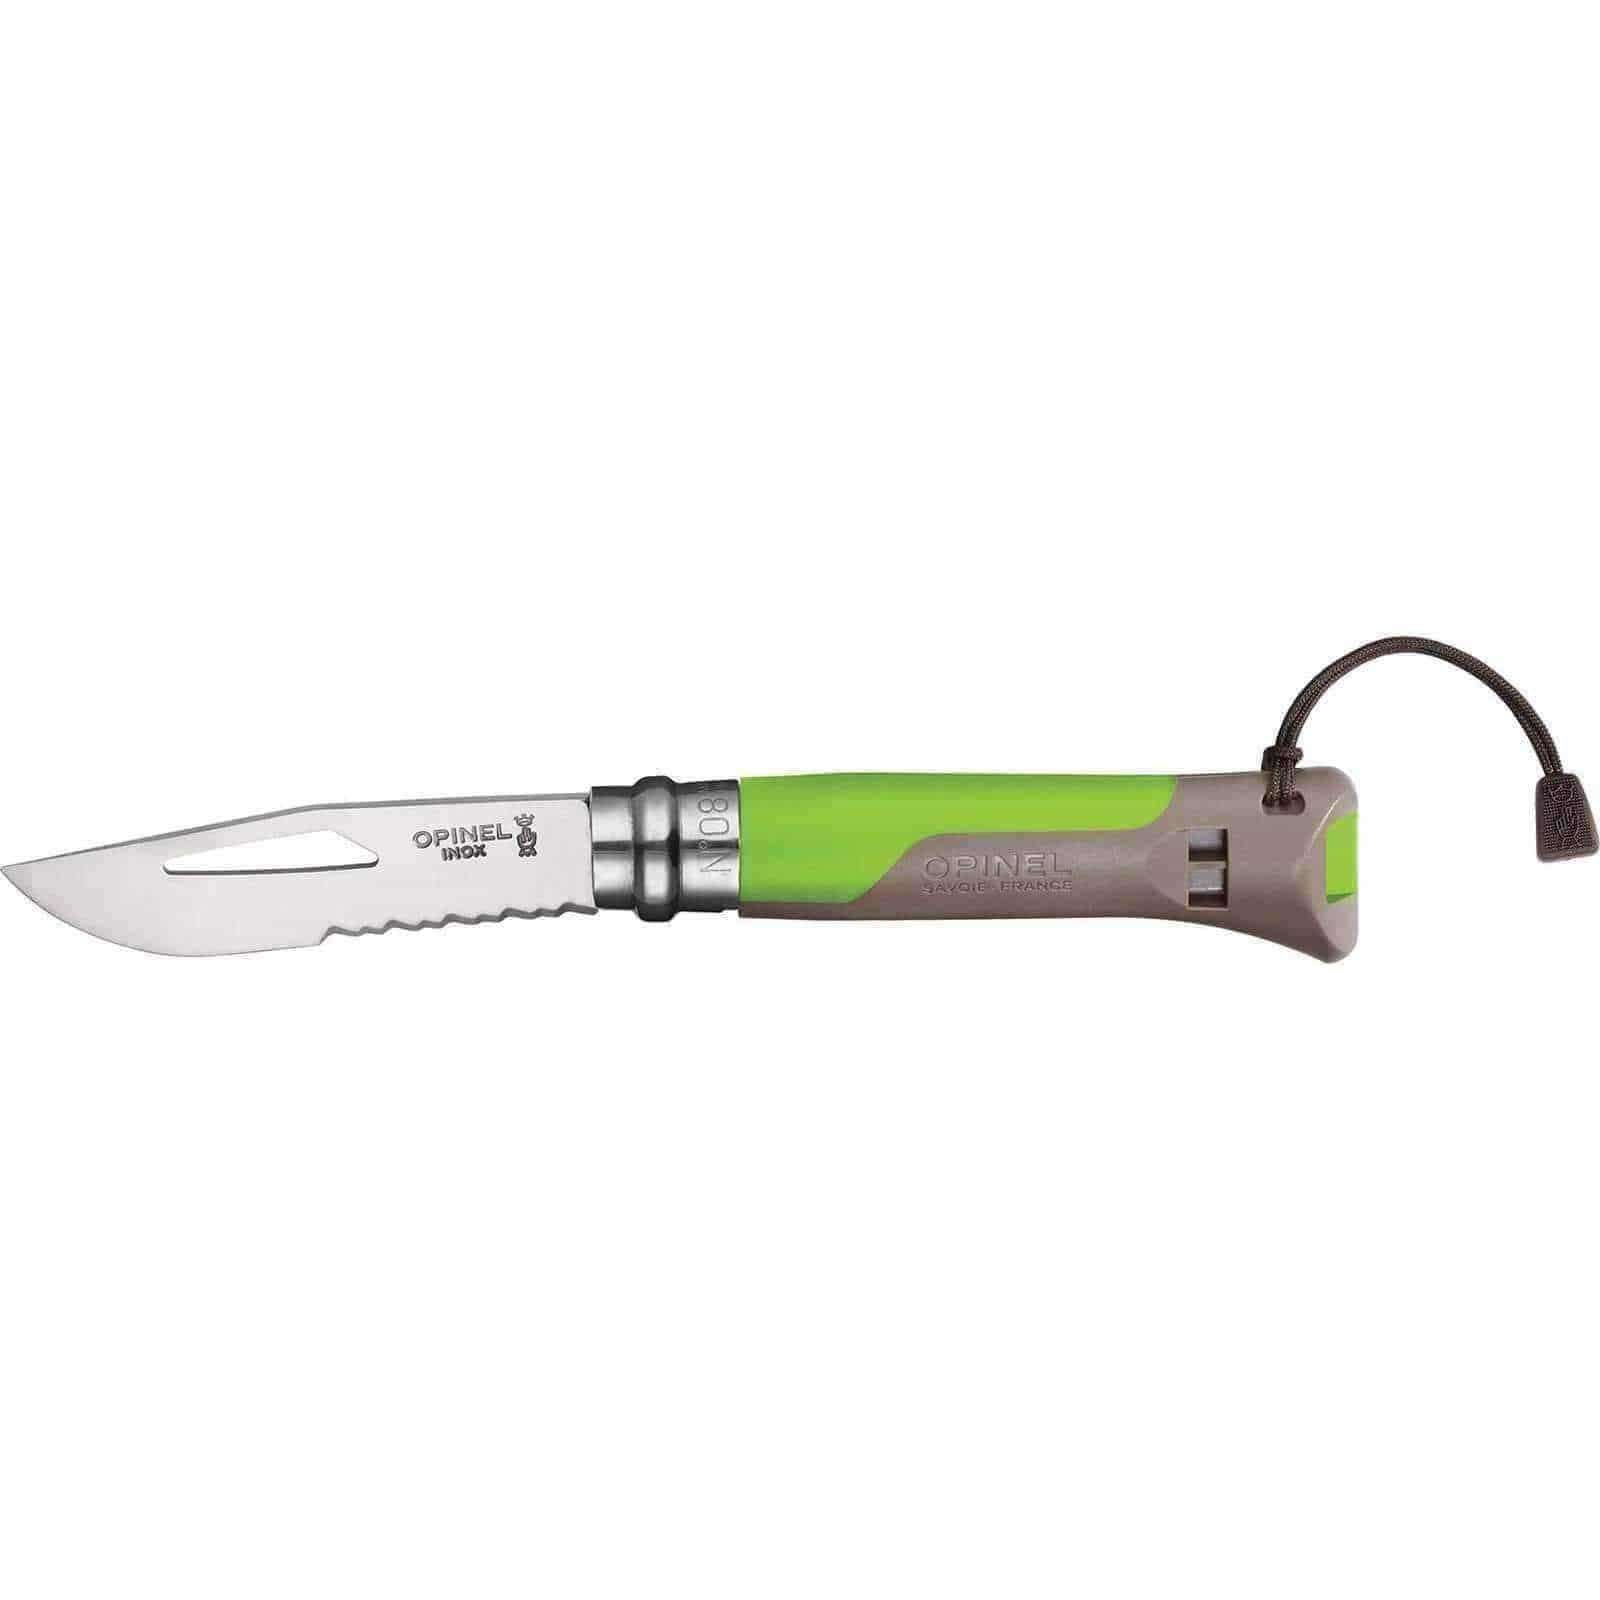 Opinel, Opinel No.8 Outdoor Knife, Folding Knives,Wylies Outdoor World,